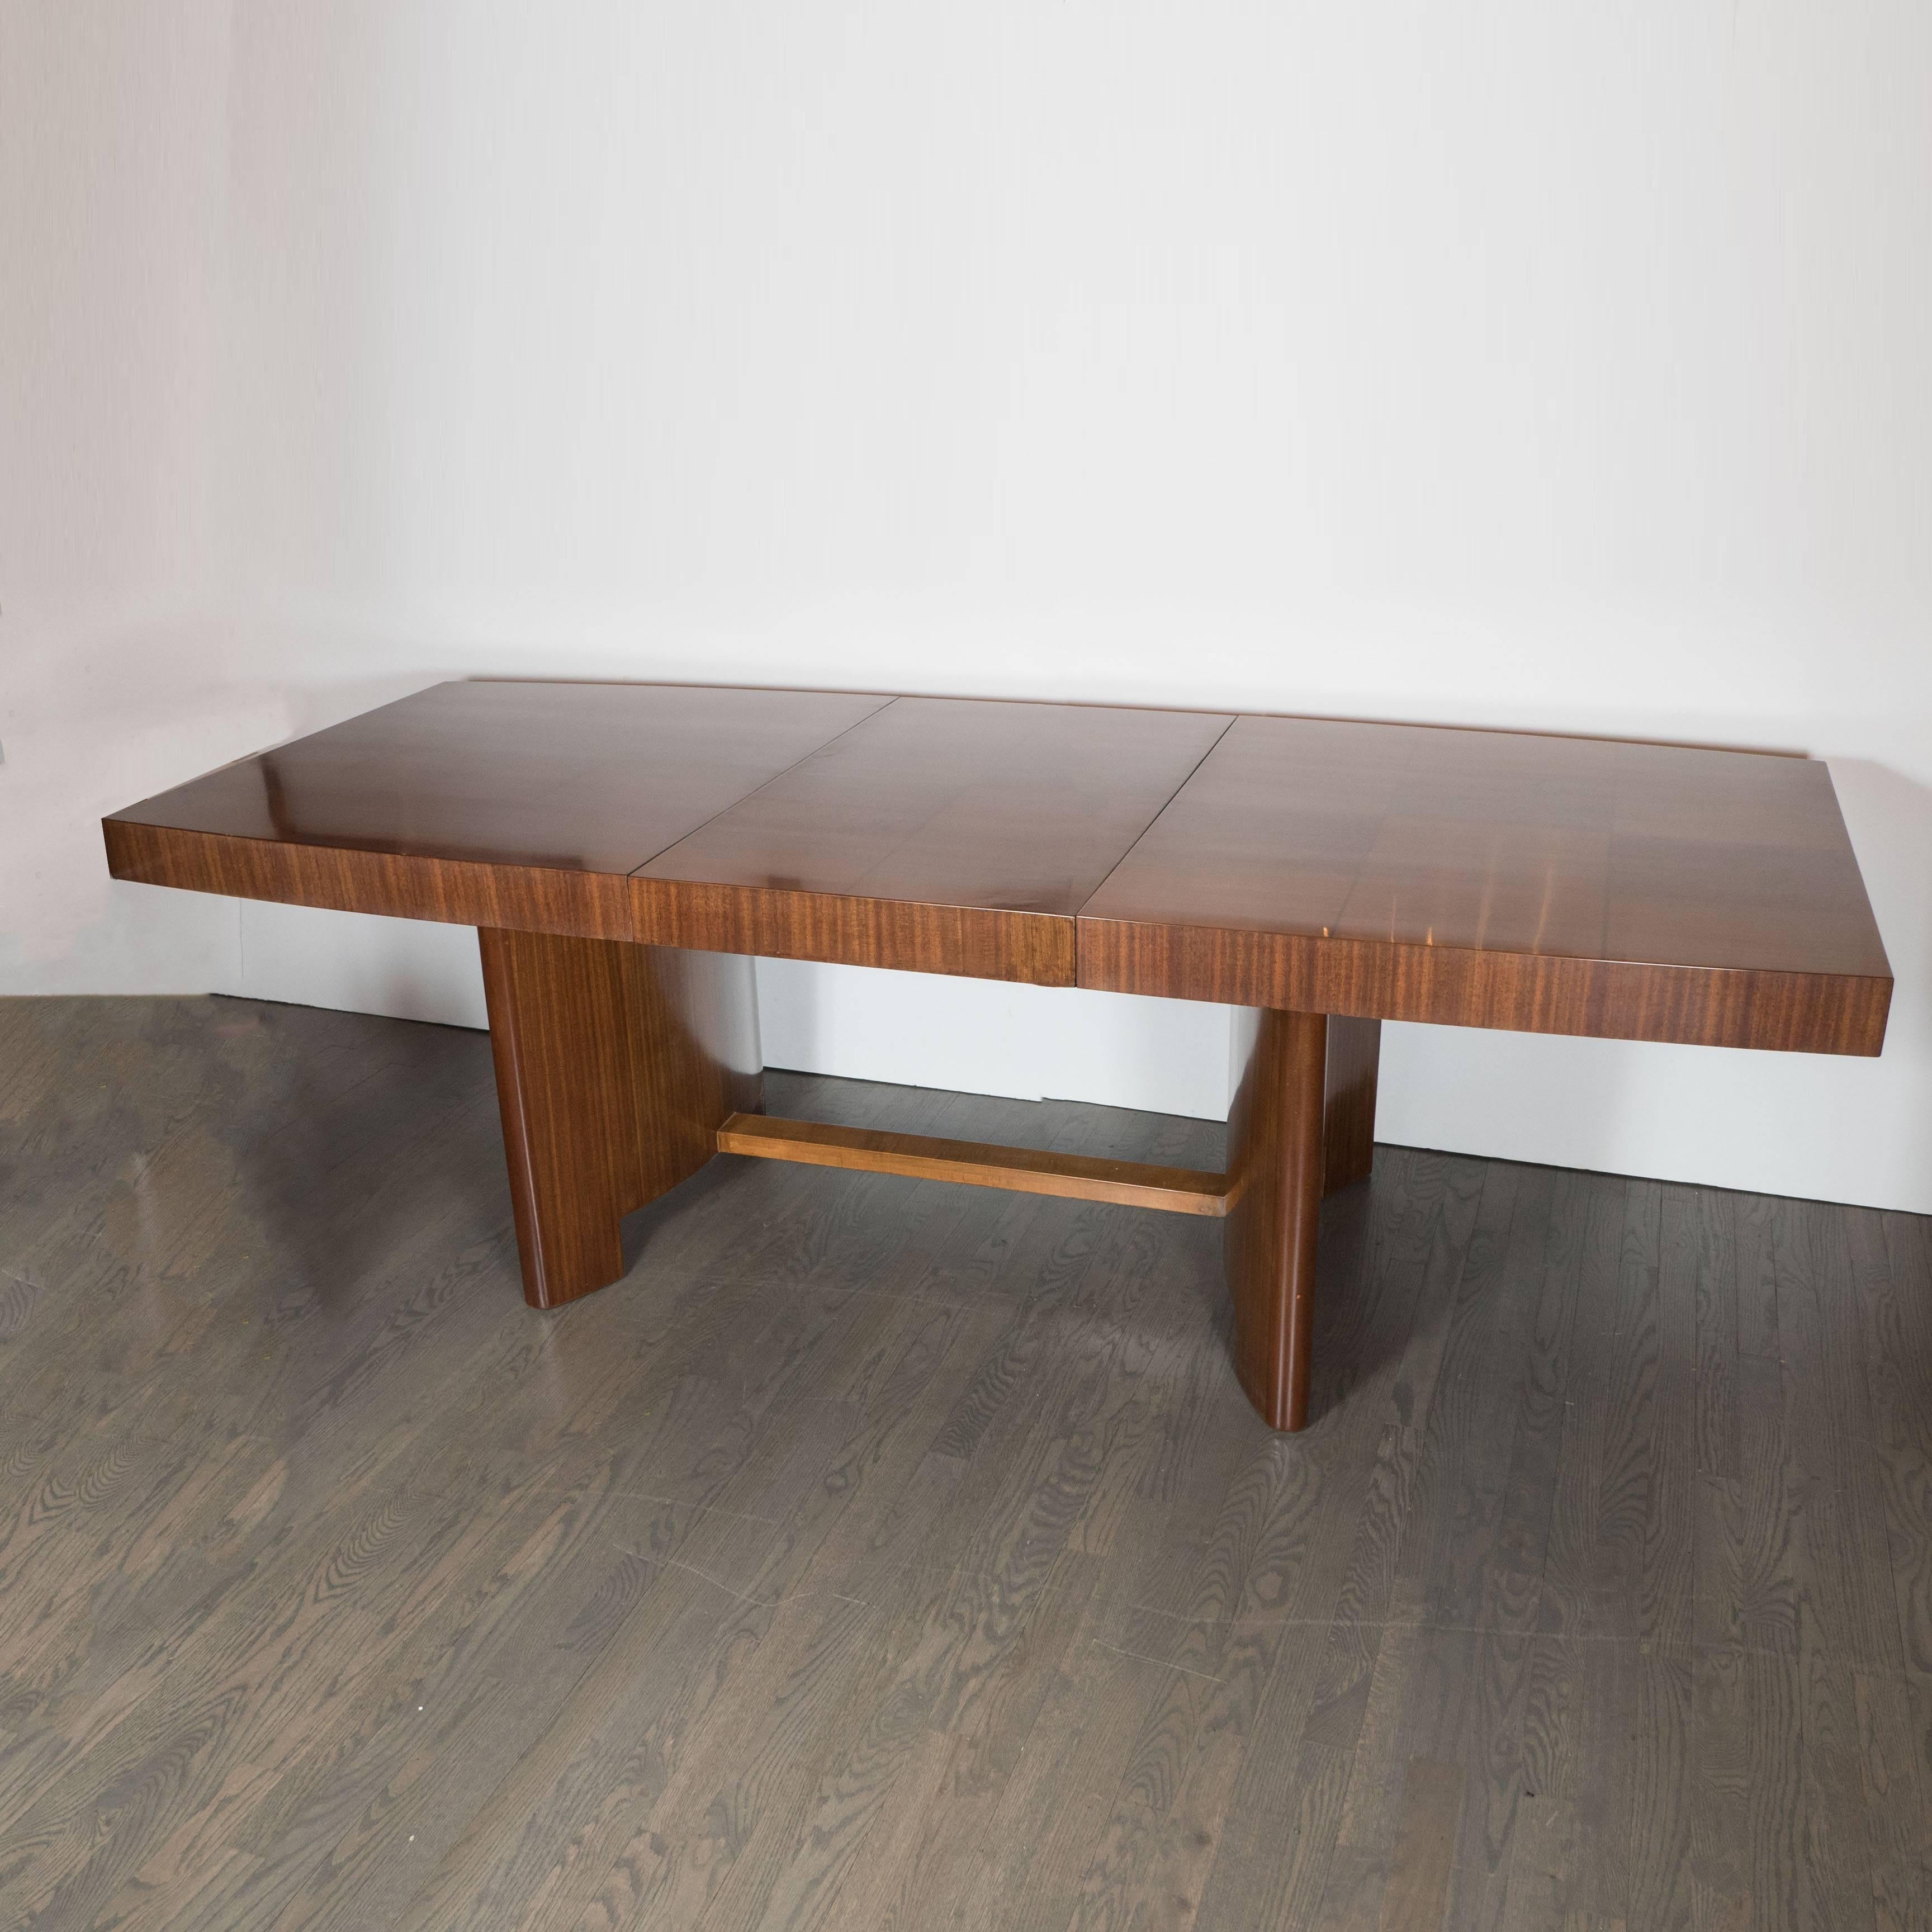 An elegant Art Deco dining table by Gilbert Rohde for Herman Miller (#3725) in Maidou burl and mahogany. 
A stunning tabletop in Maidou burl and mahogany delicately decorated with an attractive pattern of squares inset with thin lines criss